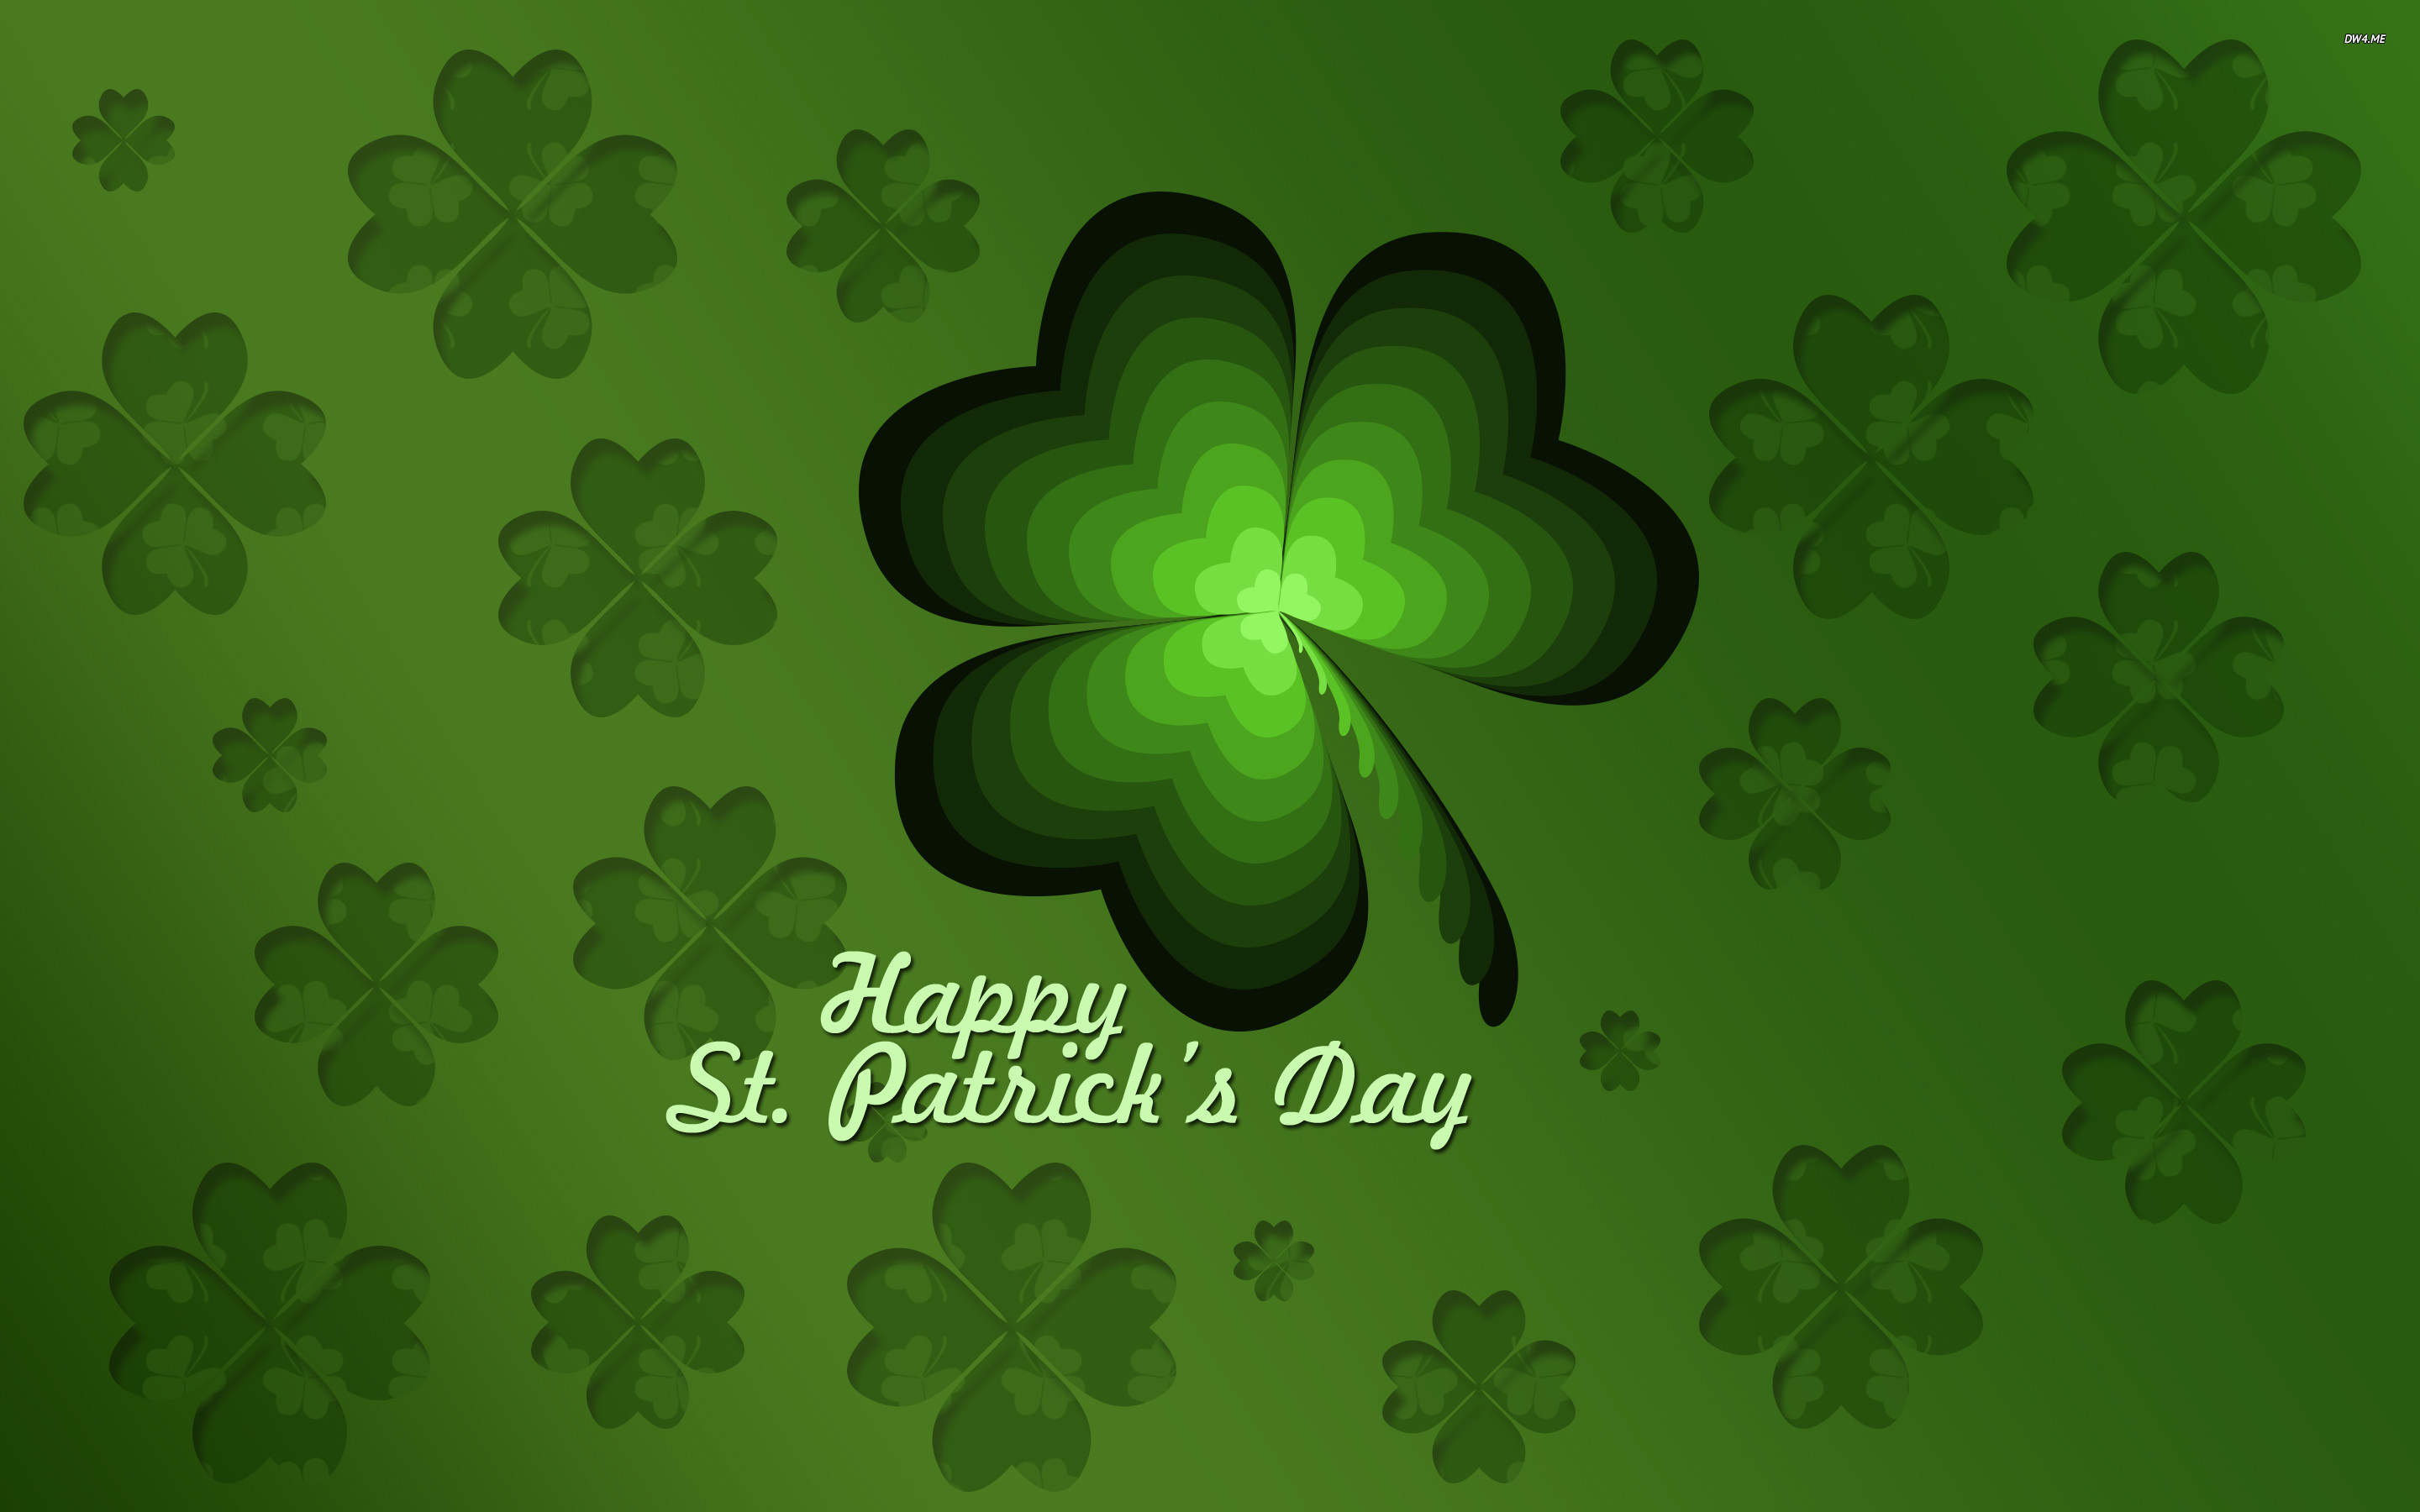 2880x1800 st patrick day wallpapers Pictures to Pin on Pinterest - PinsDaddy